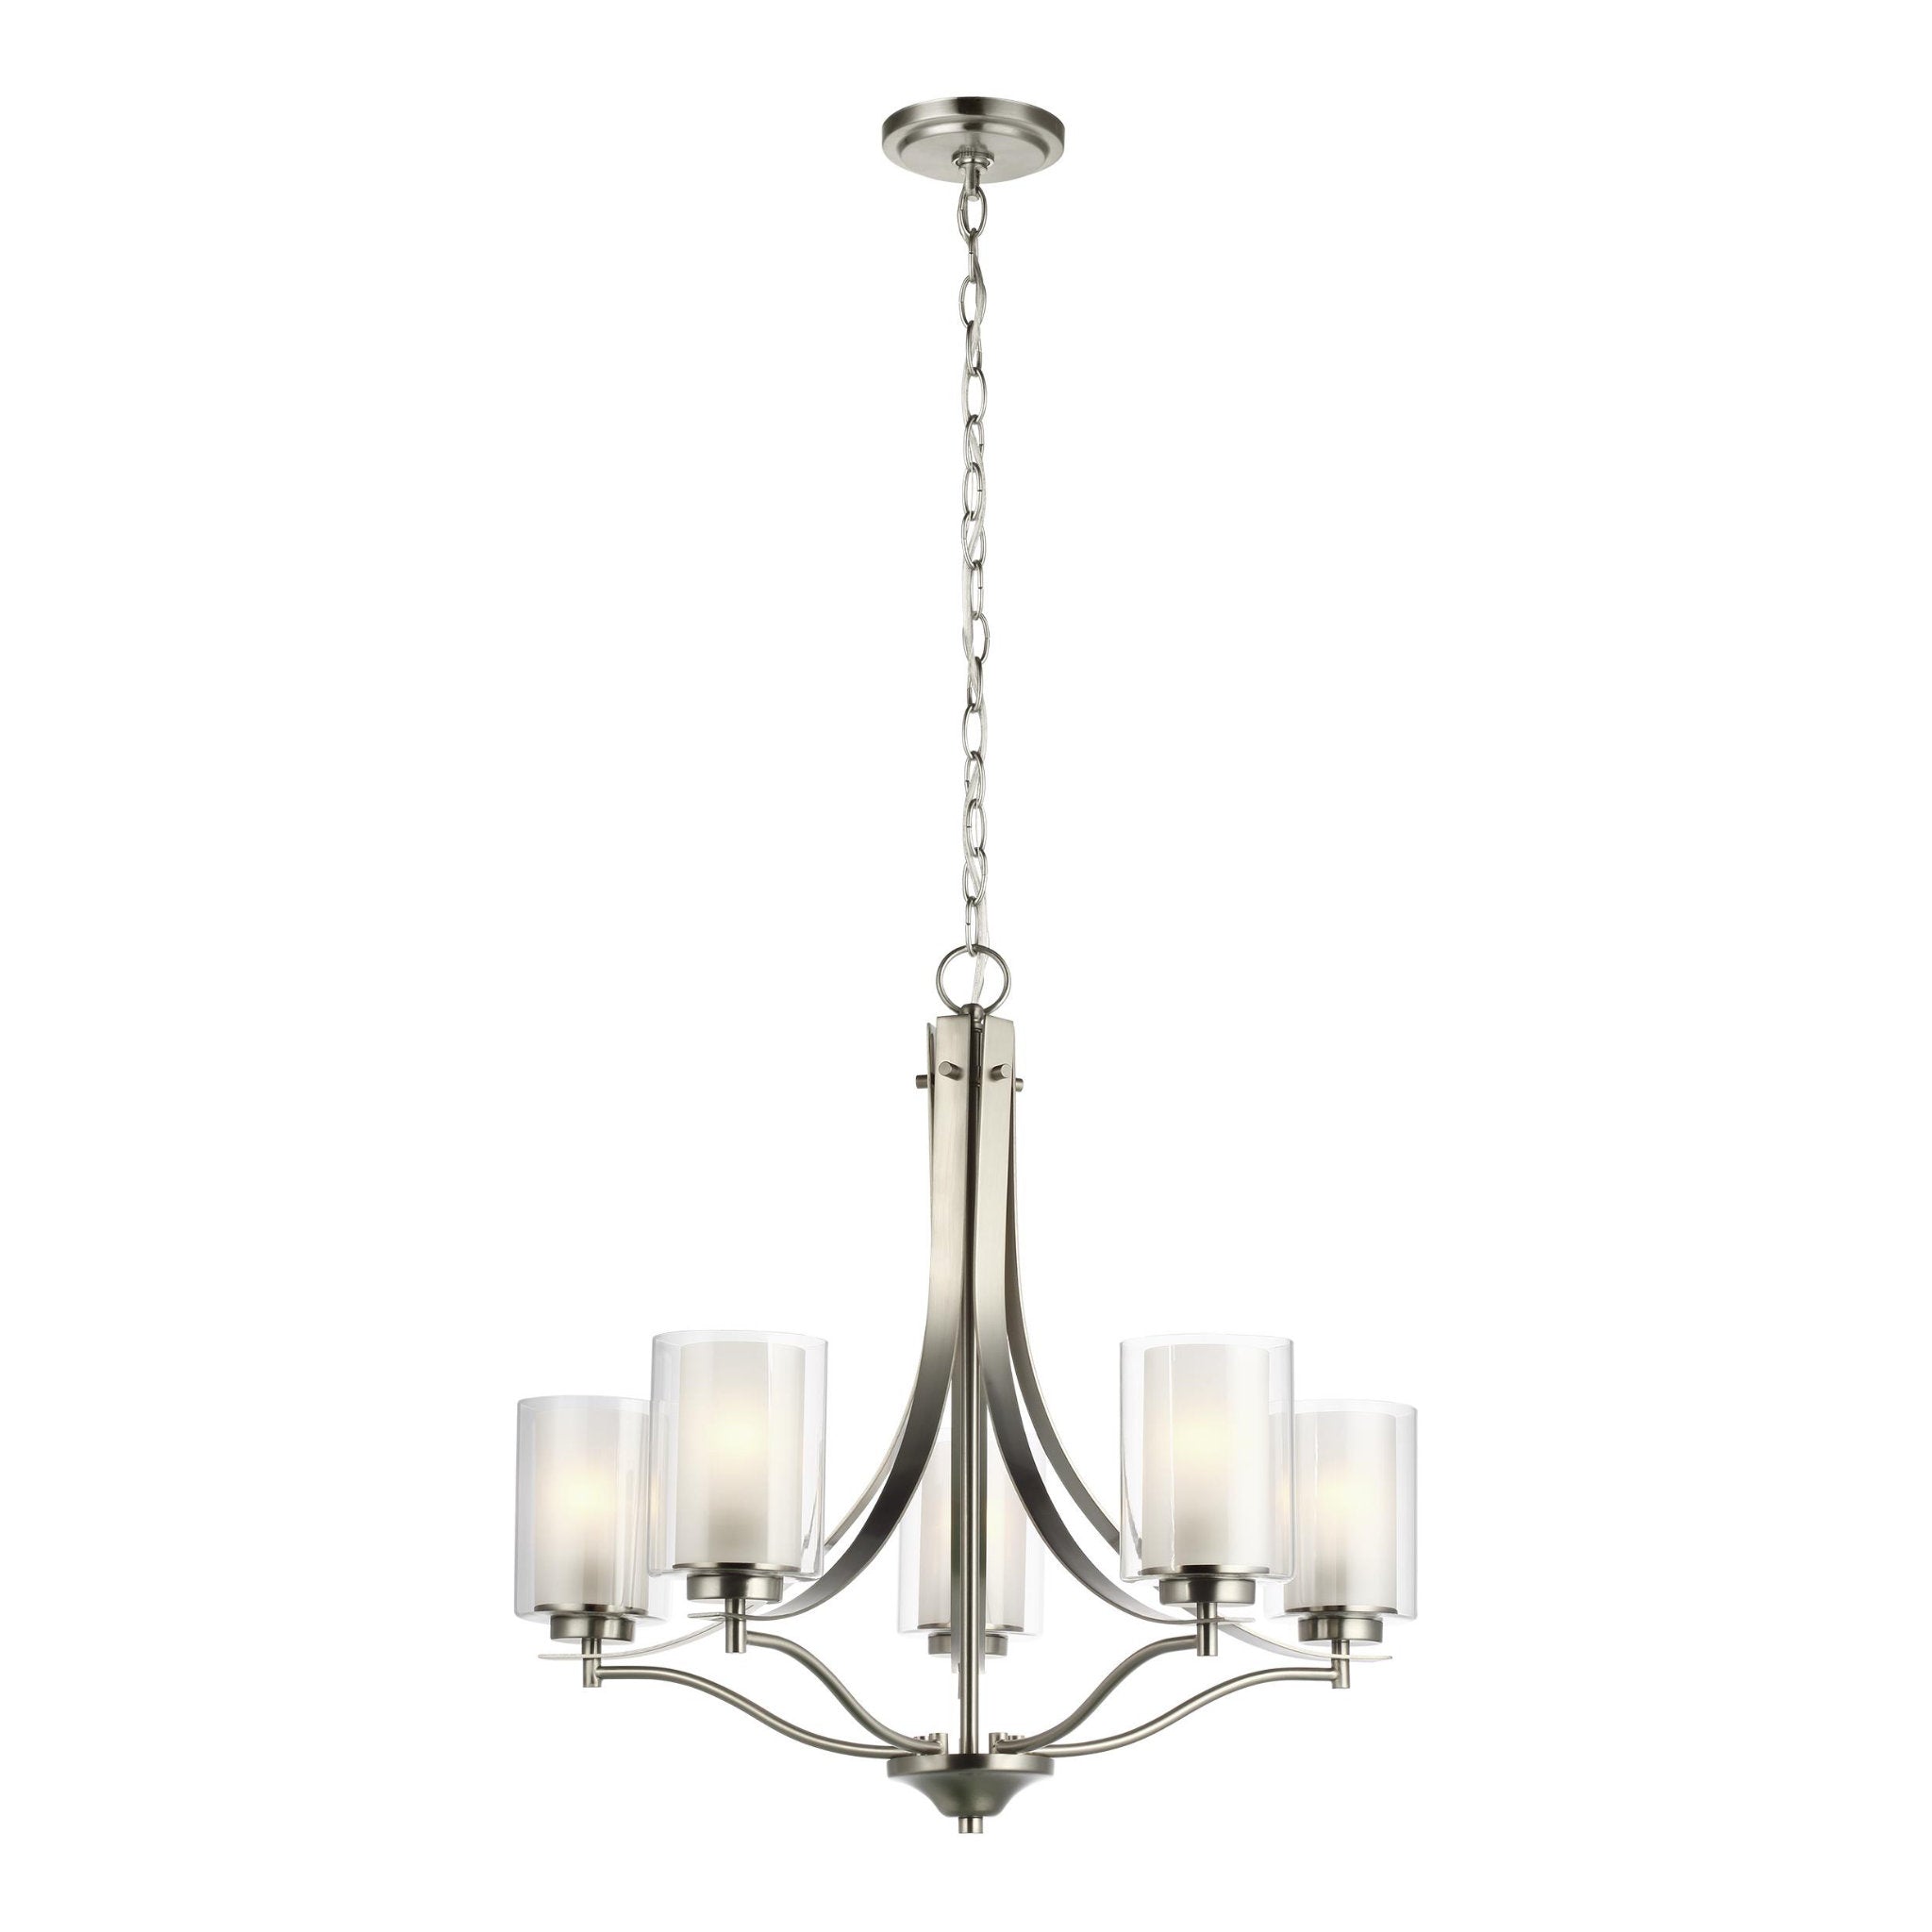 Elmwood Park Five Light Chandelier Traditional 24.125" Height Steel Round Satin Etched Shade in Brushed Nickel